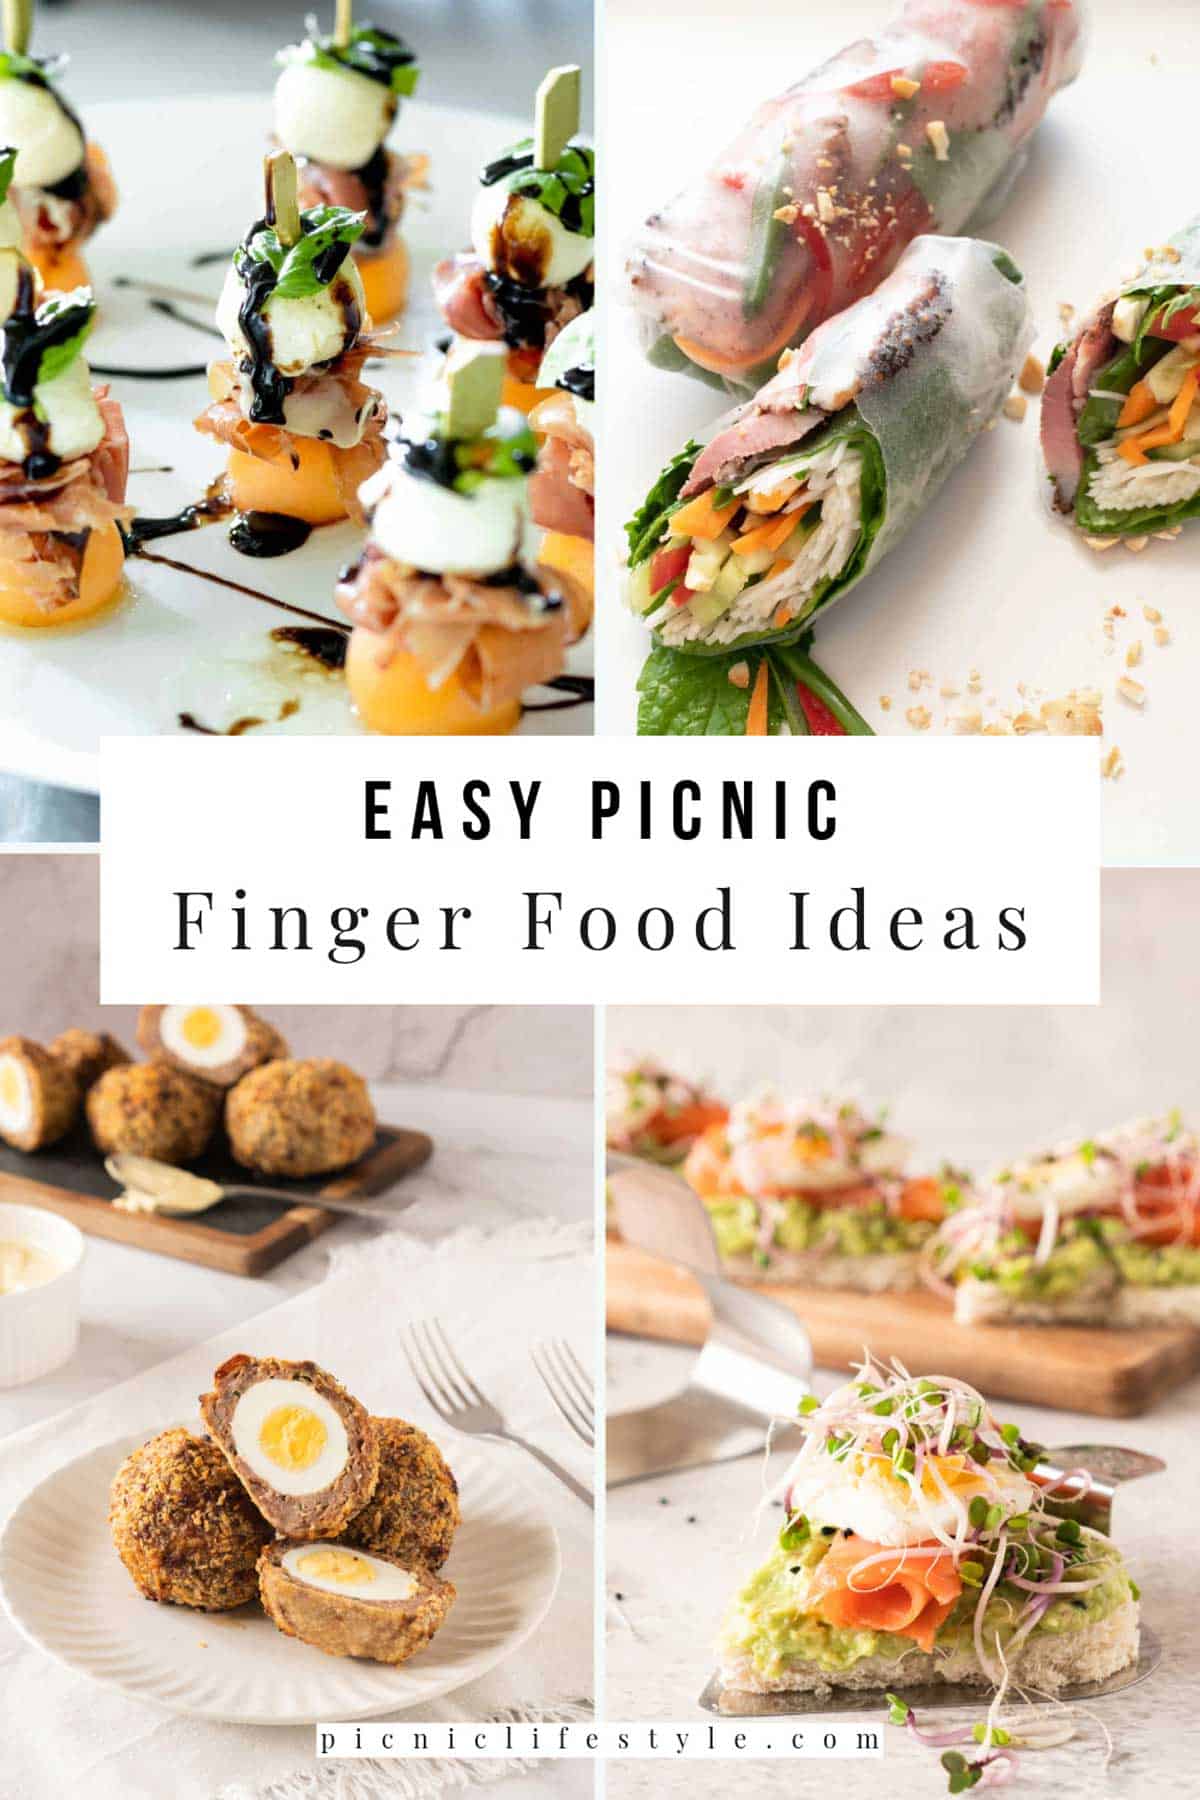 A collage showcasing a variety of easy finger food ideas suitable for a picnic.